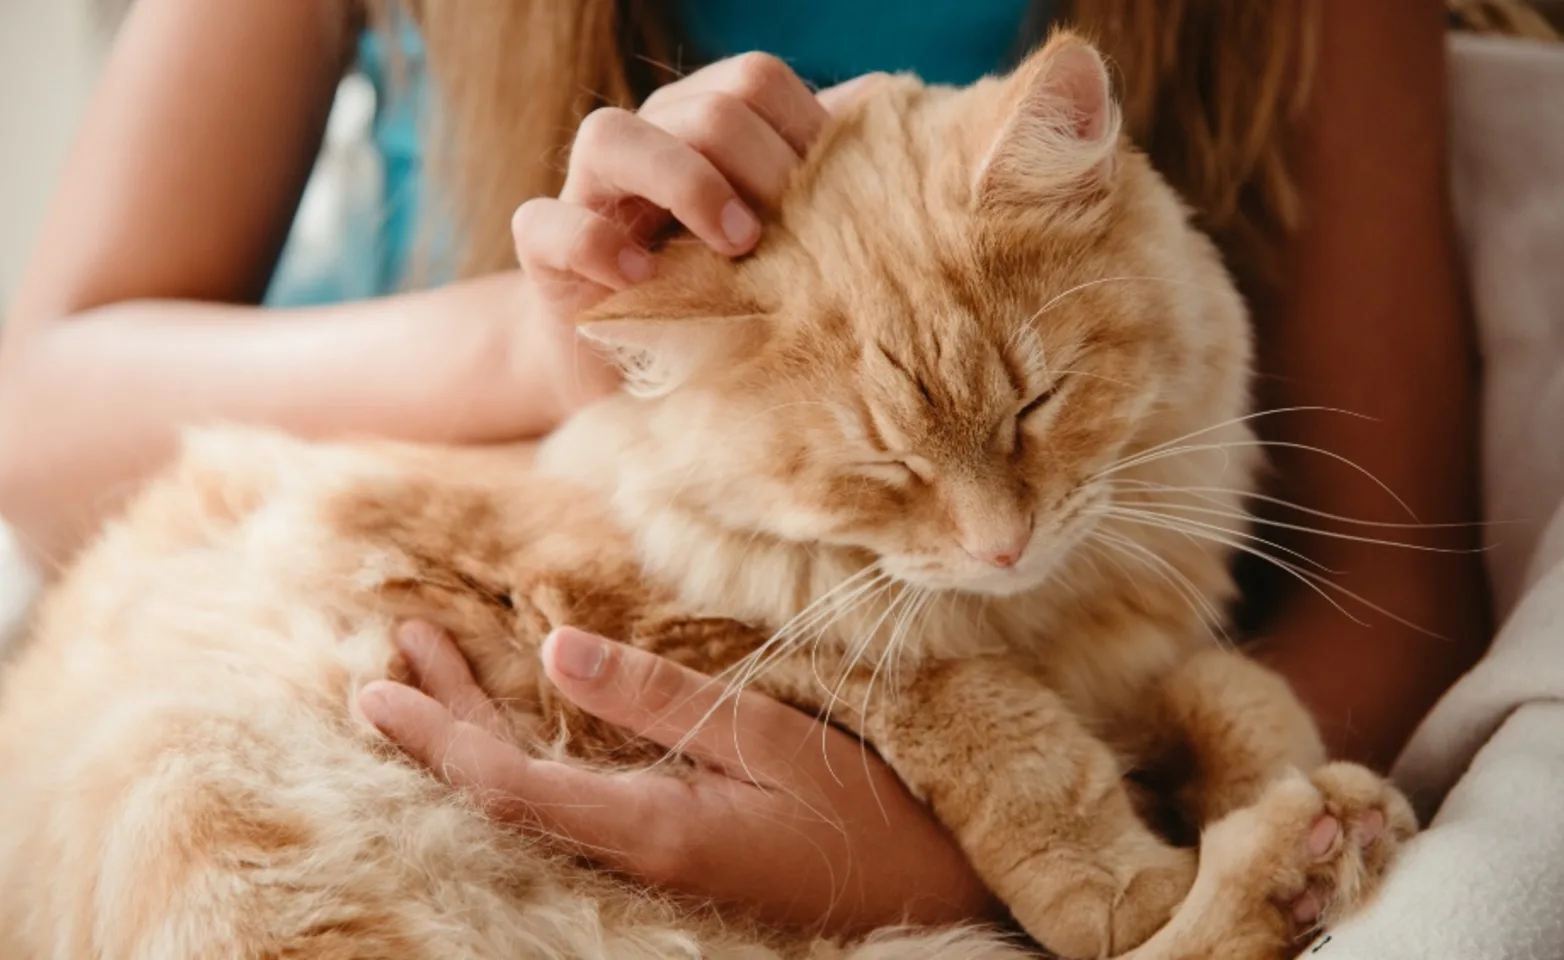 A red cat sitting being pet and snuggled